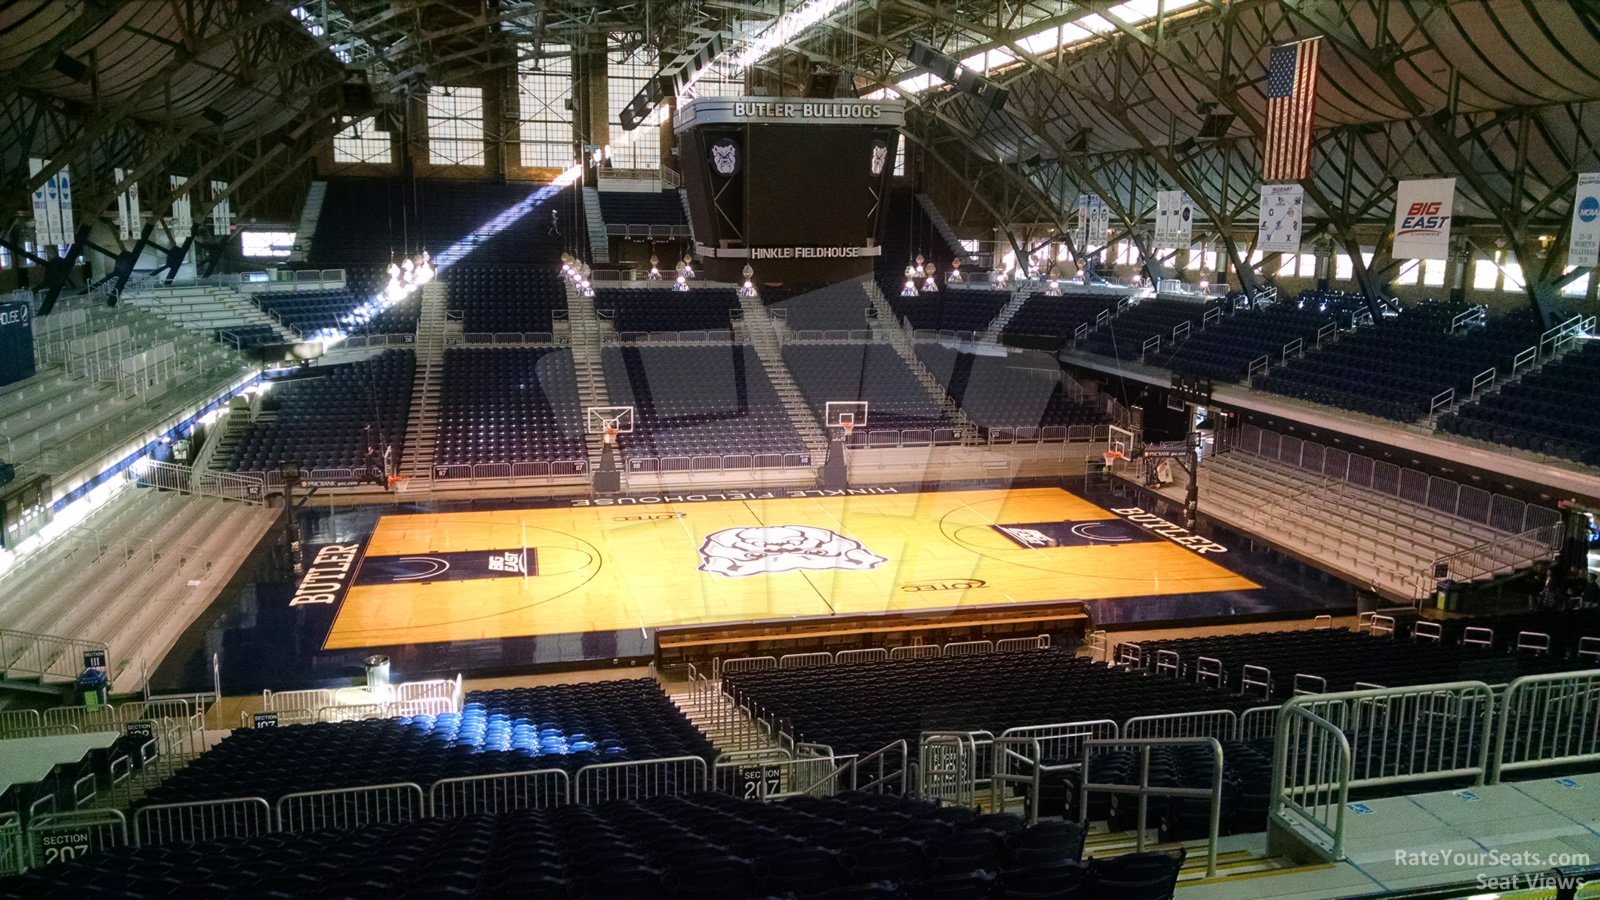 section 307, row 4 seat view  - hinkle fieldhouse